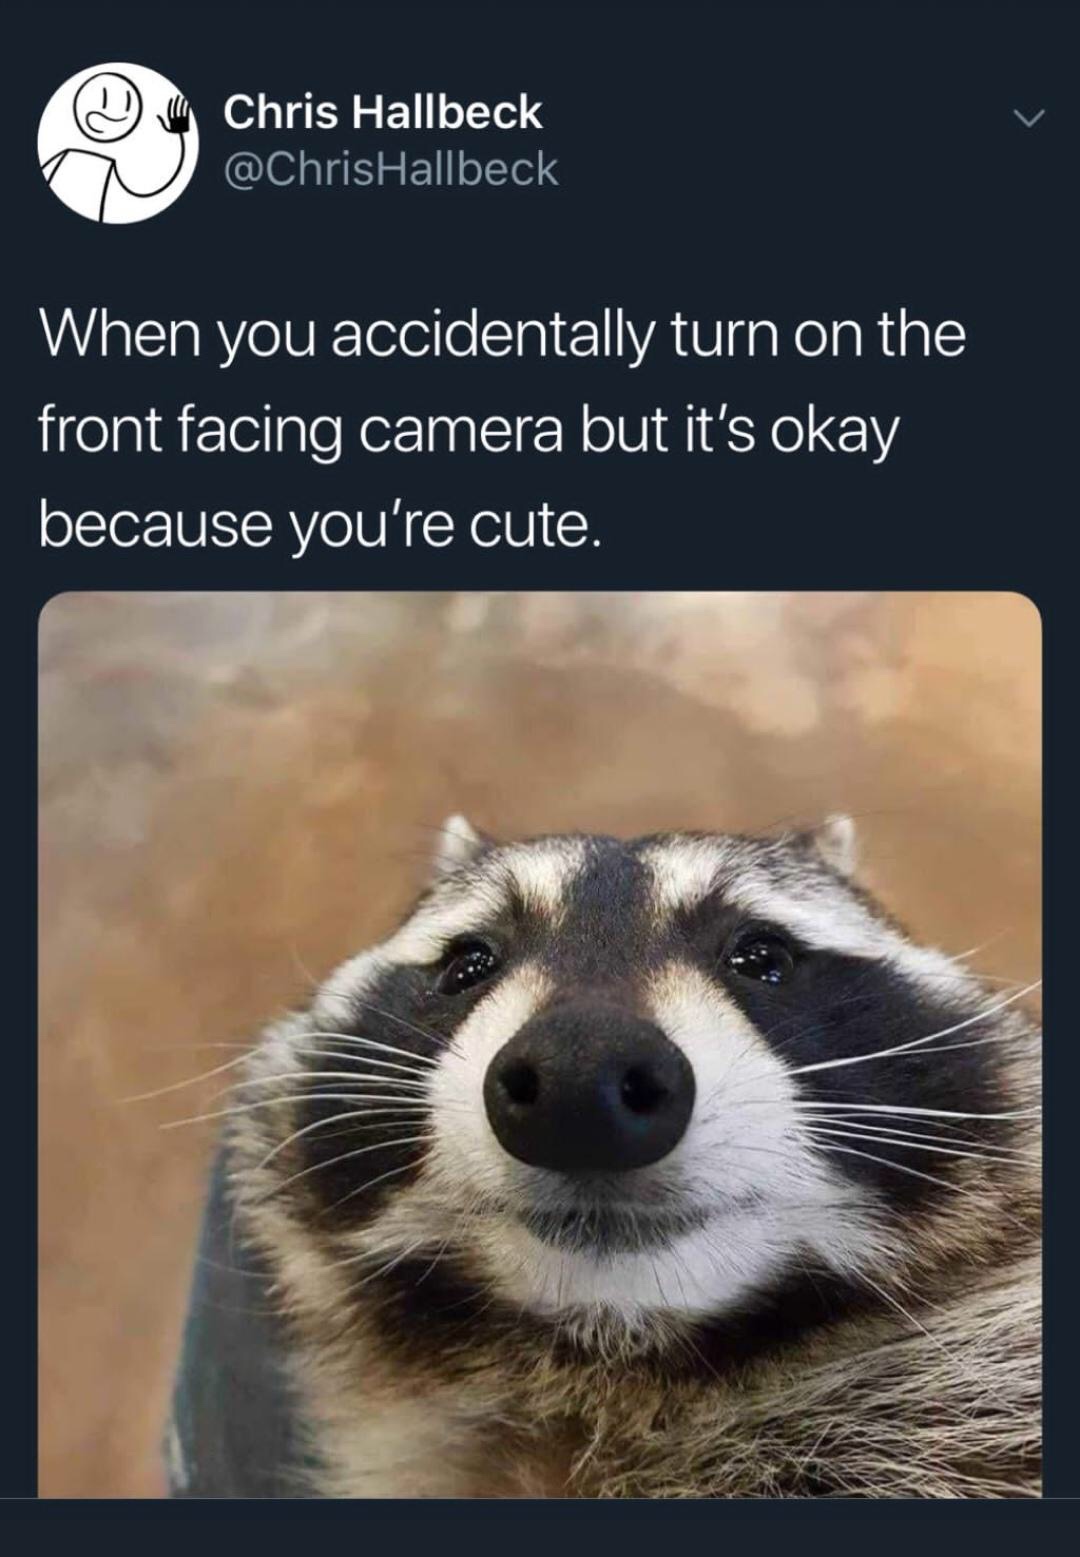 raccoon meme - Chris Hallbeck Hallbeck When you accidentally turn on the front facing camera but it's okay because you're cute.